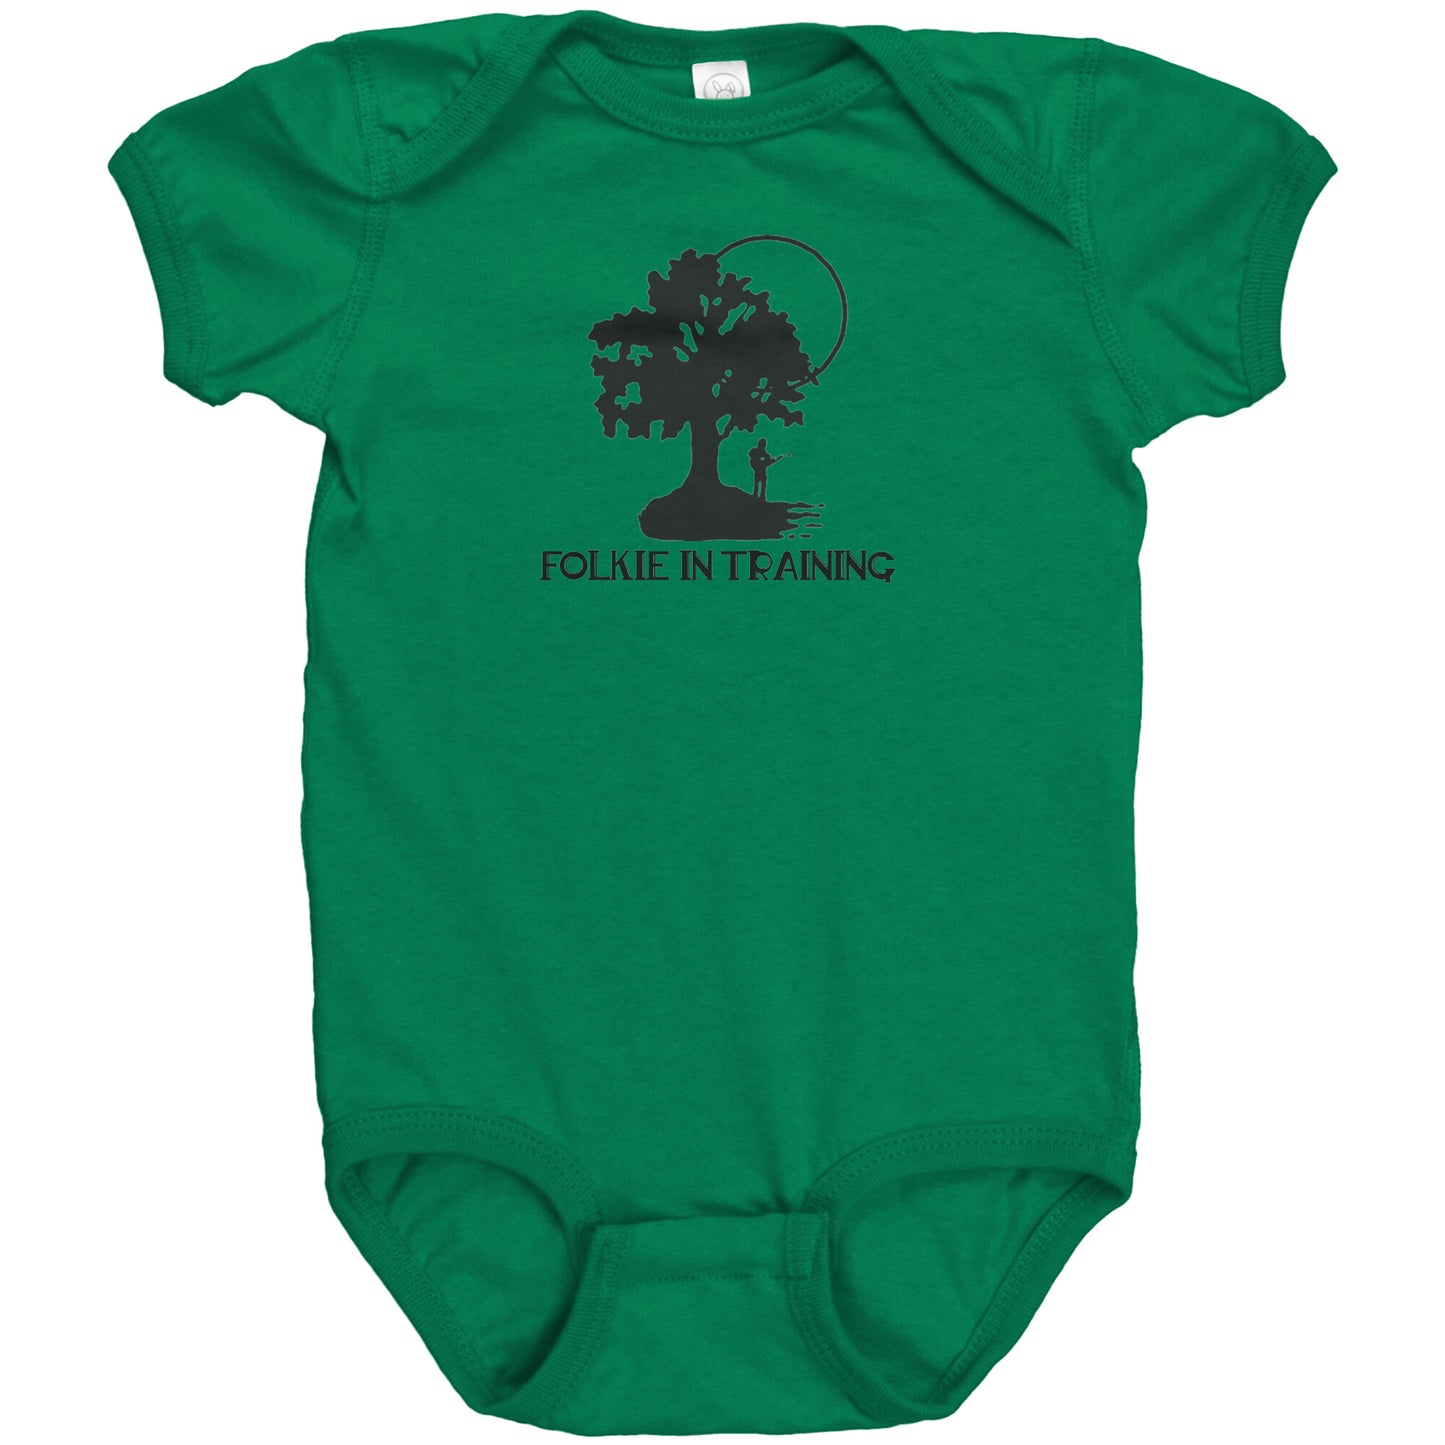 Folkie in Training Baby Body Suit (online only)